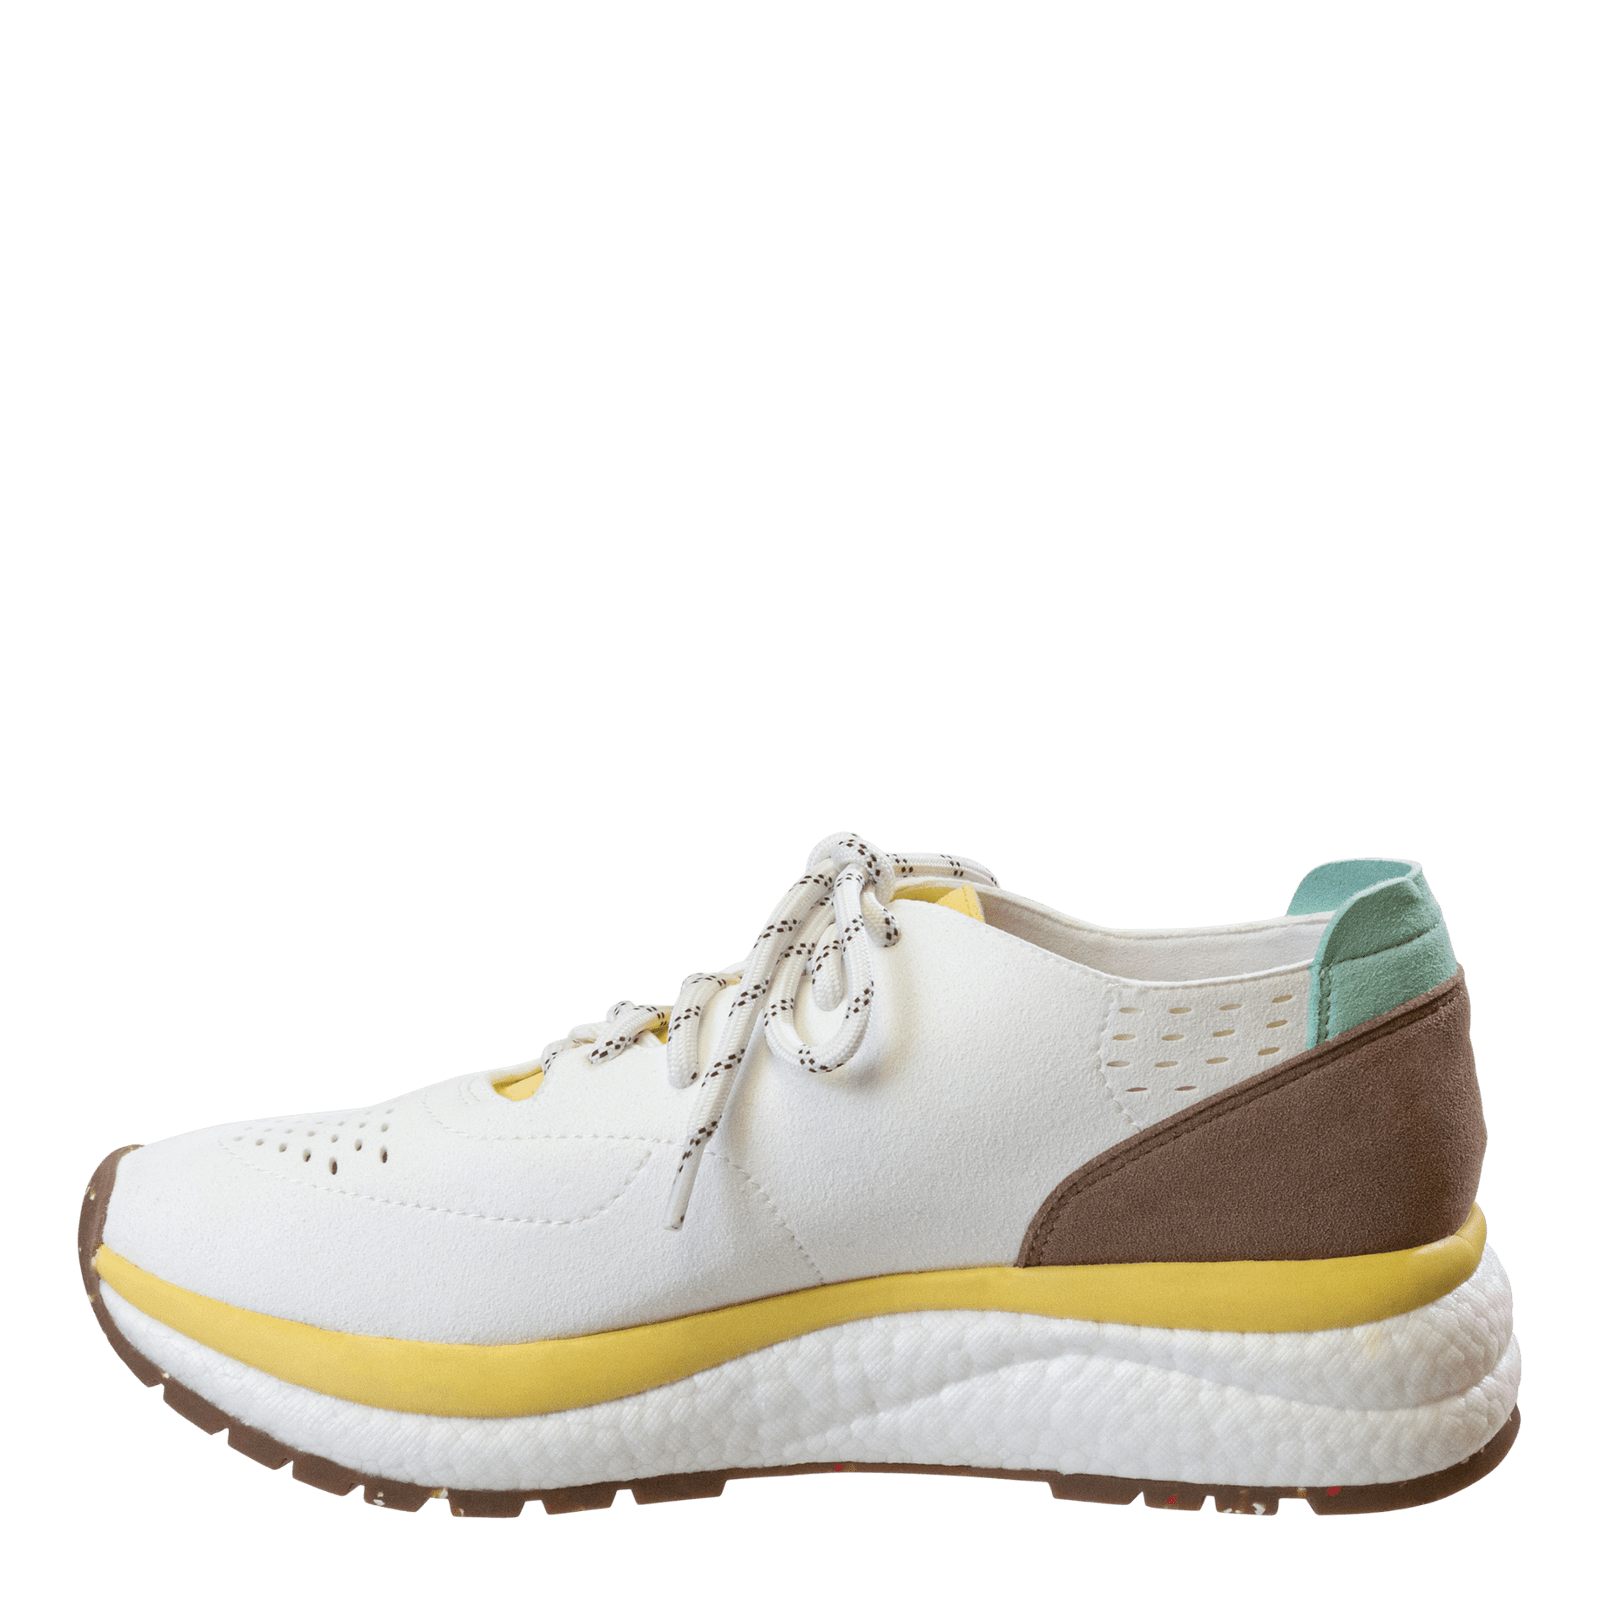 How to Wear Espadrille Sneakers - OTBT shoes